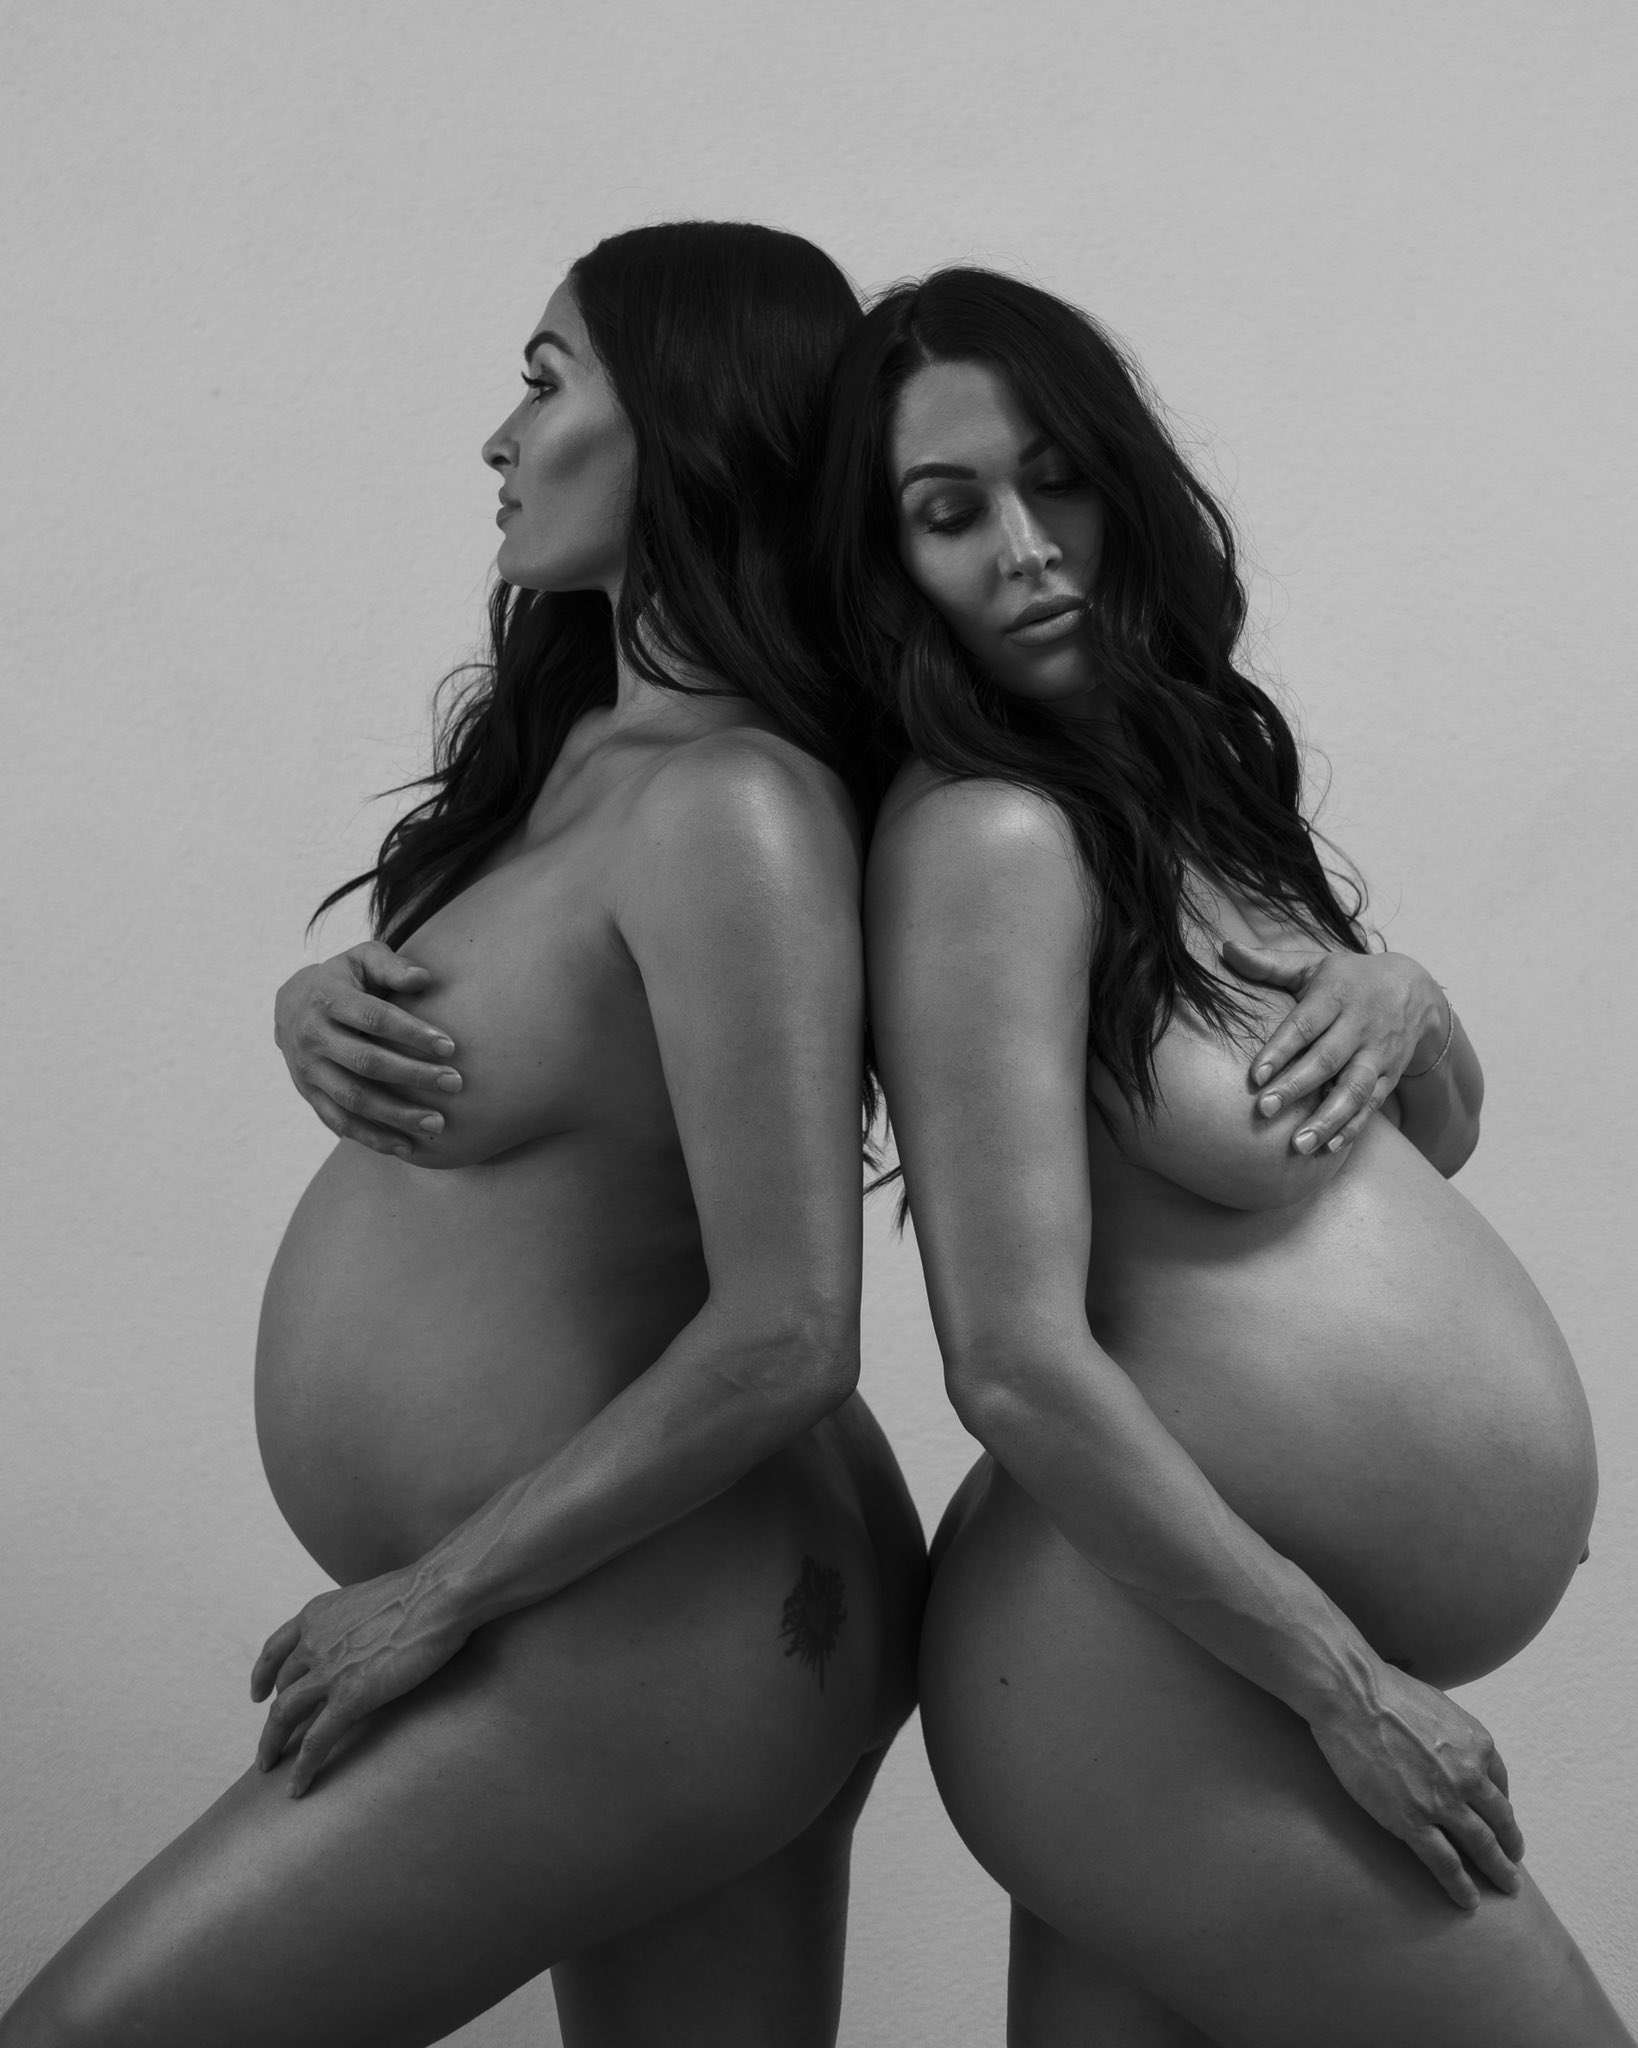 Brie Bella And Nikki Bella Share Naked Pregnancy Photos To Entertain WWE Fa...